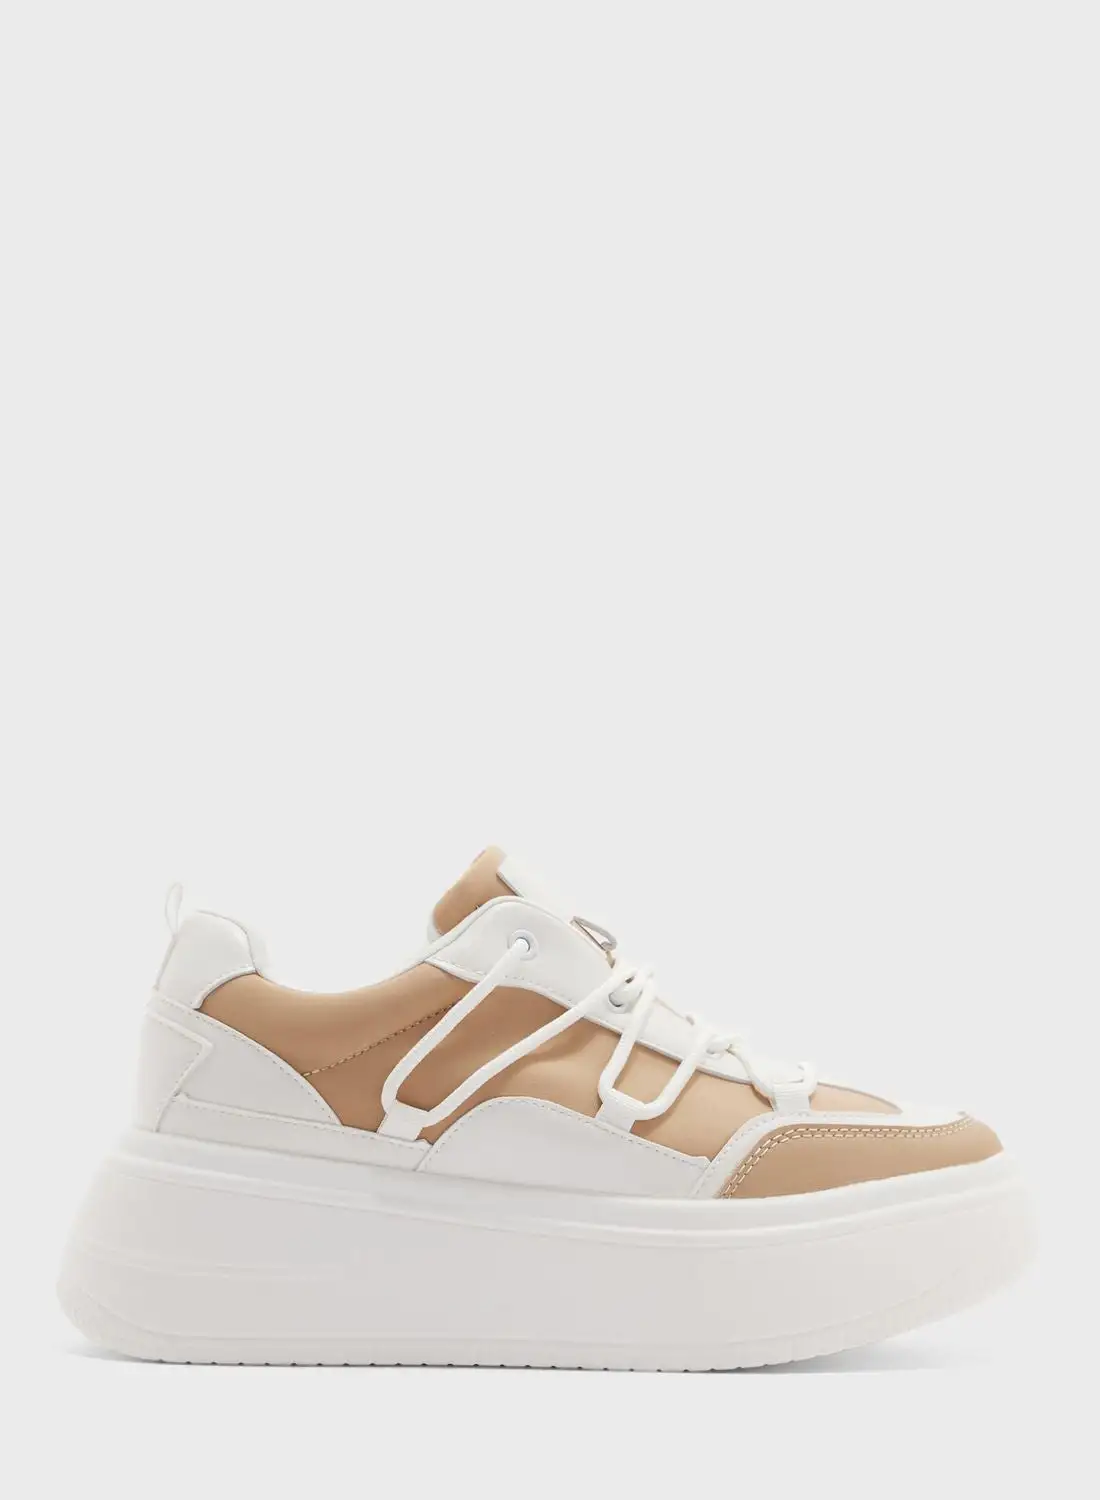 Ginger Zigzag Strap Stacked Sole Sneaker